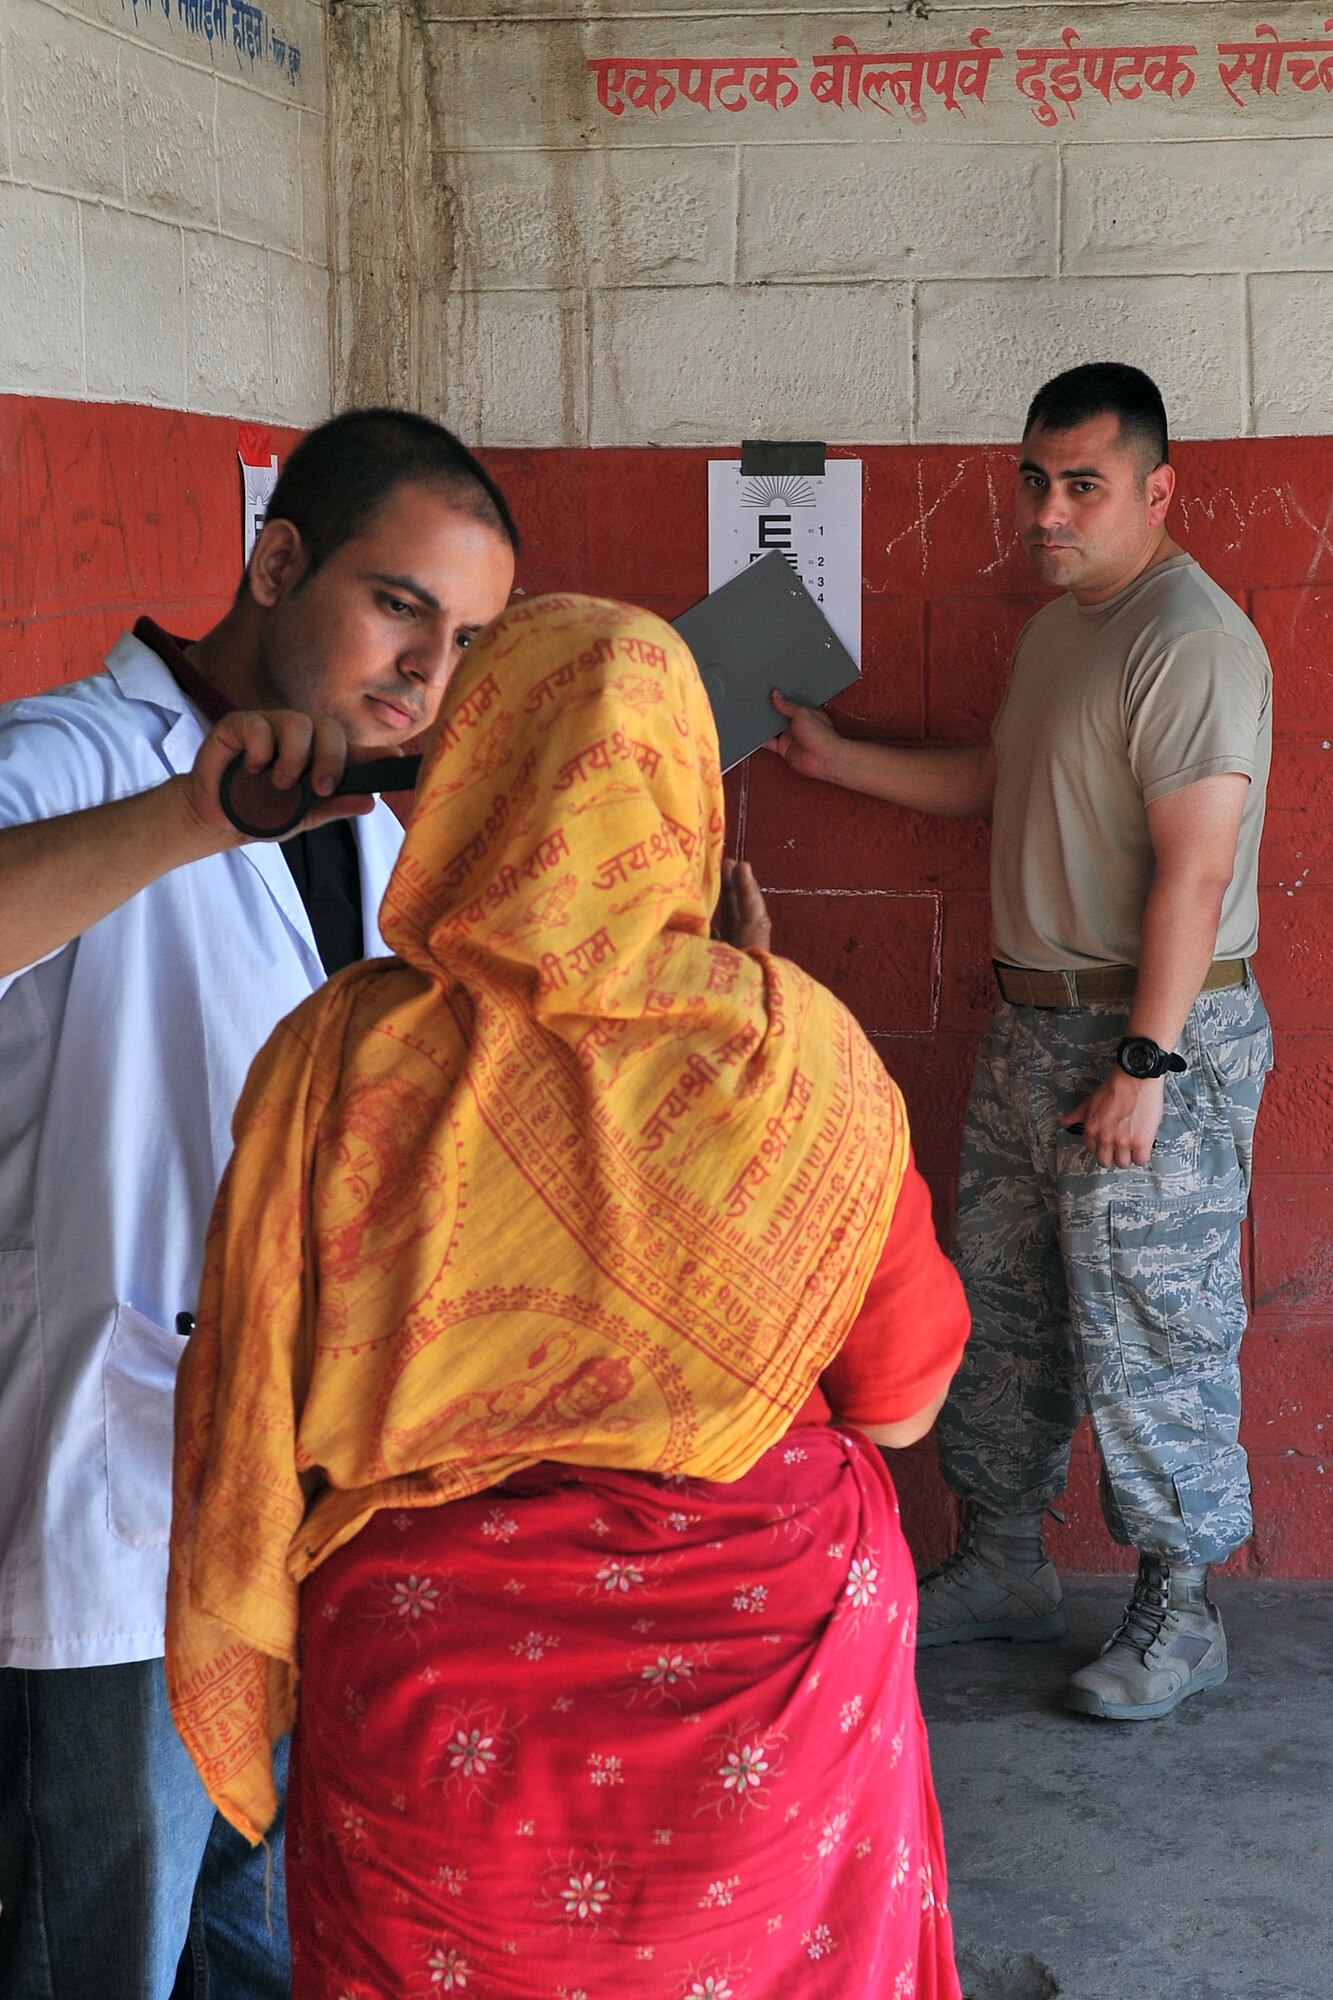 U.S. Air Force Staff Sgt. Nemesio Perez, Operation Pacific Angel-Nepal optometry technician, and Dr. Santosh Bhusal, Nepalese optometrist, perform a visual acuity test on a patient at a health services outreach site in Manahari, Nepal, Sept. 8, 2014. PACANGEL supports U.S. Pacific Command’s capacity-building efforts by partnering with other governments, non-governmental agencies and multilateral militaries in the respective region to provide medical, dental, optometry and engineering assistance to their citizens. (U.S. Air Force photo by Staff Sgt. Melissa B. White/Released)